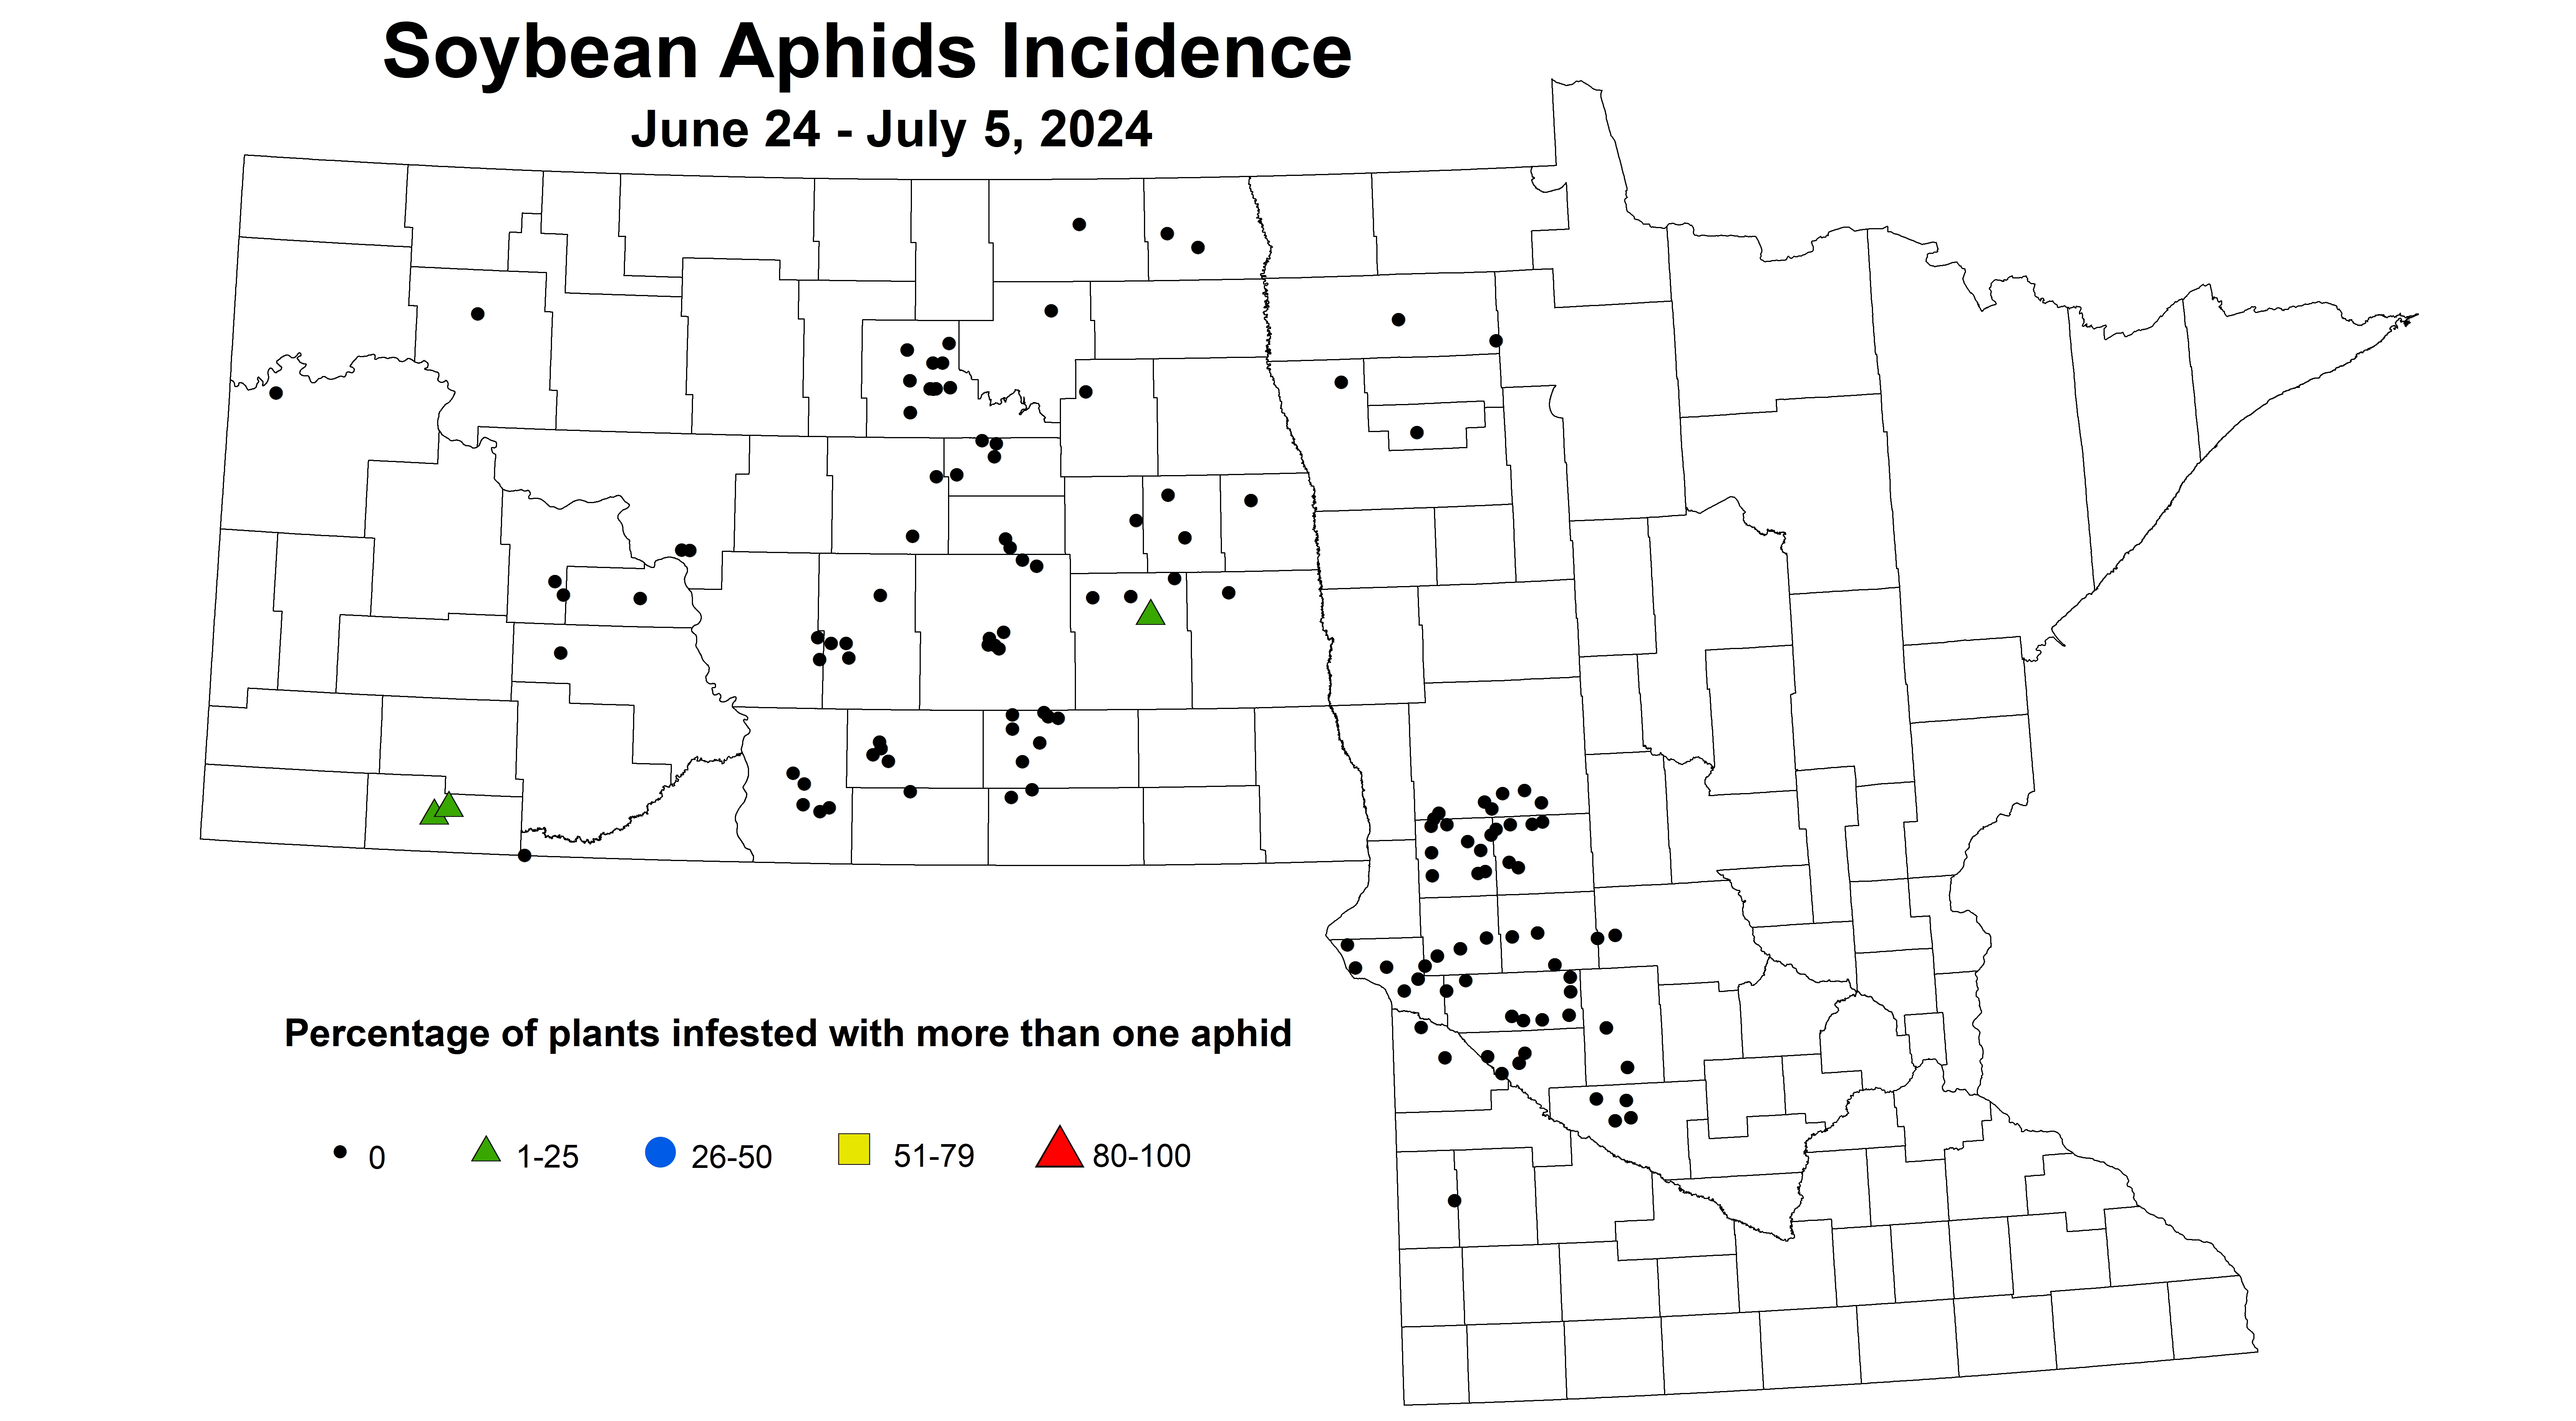 soybean aphids incidence June 24 to July 5 2024